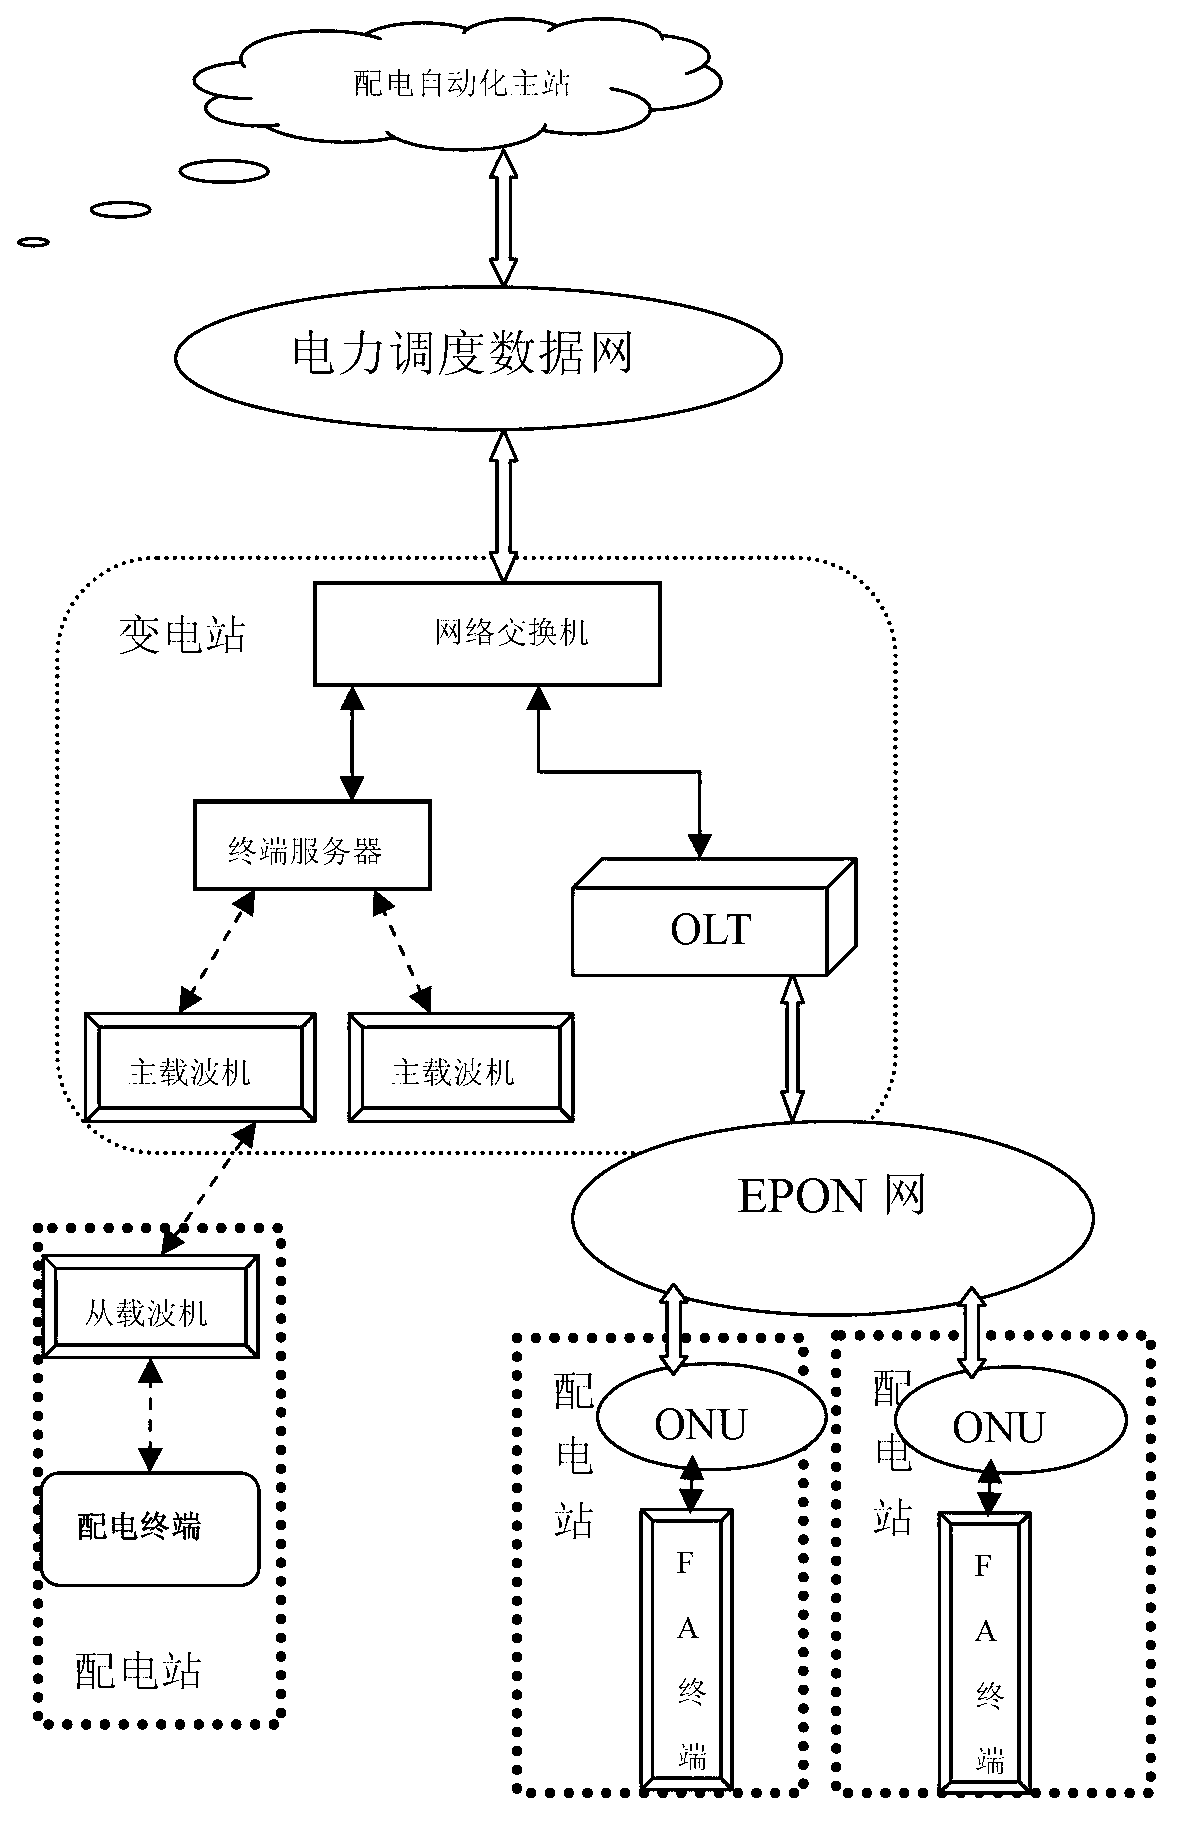 Method for connecting power distribution terminal into scheduling data network through NAT (Network Address Translation) manner